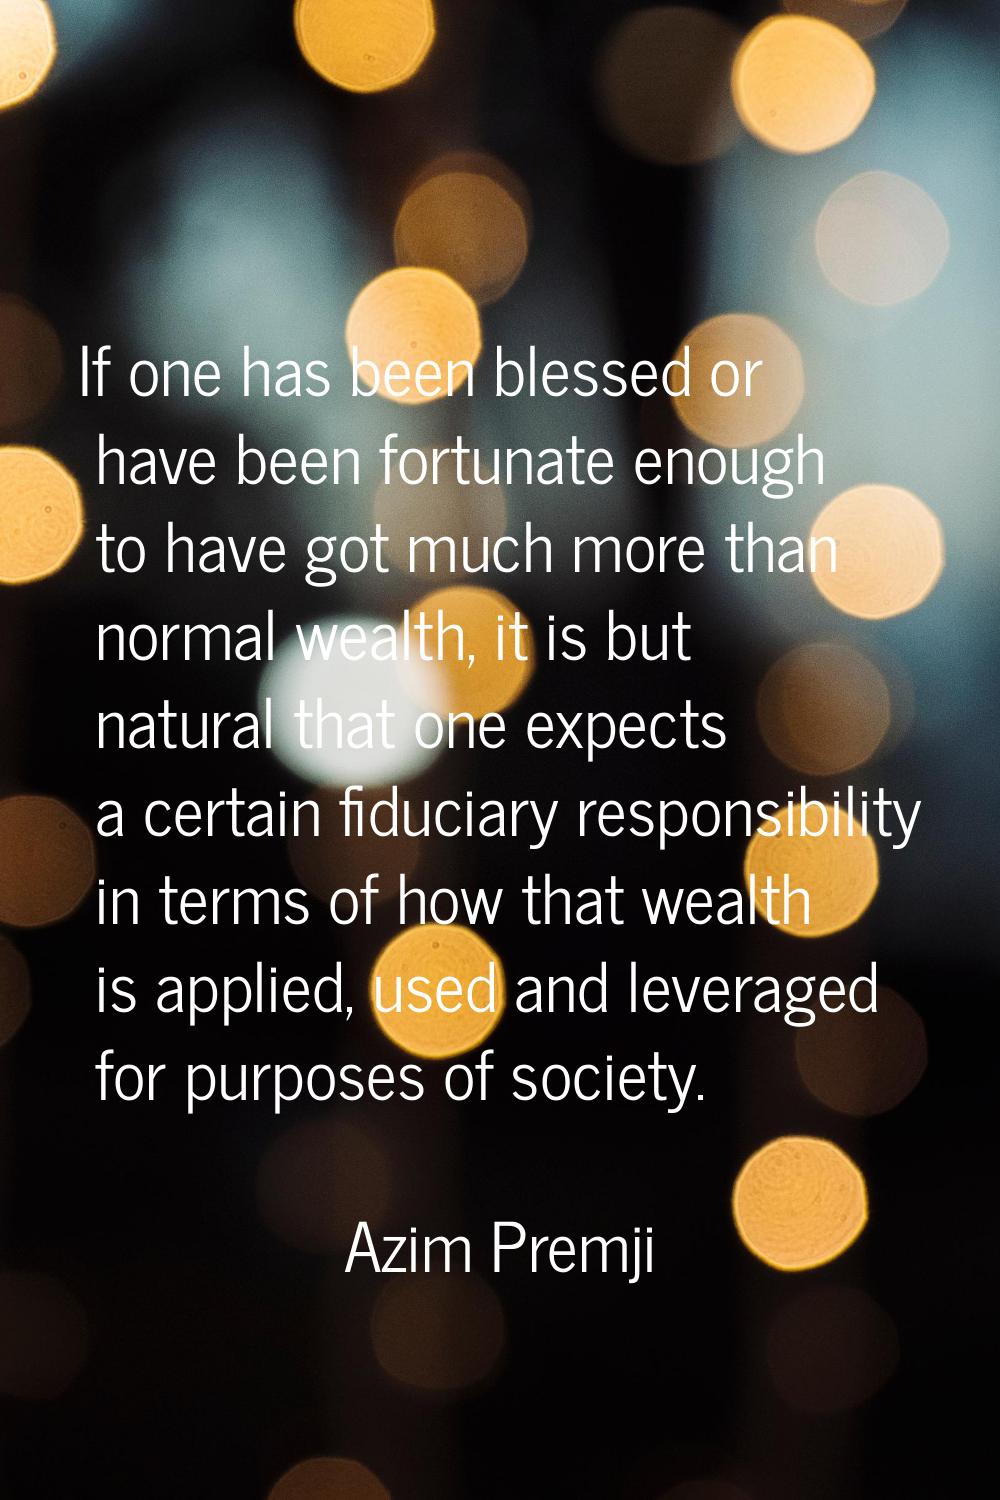 If one has been blessed or have been fortunate enough to have got much more than normal wealth, it 